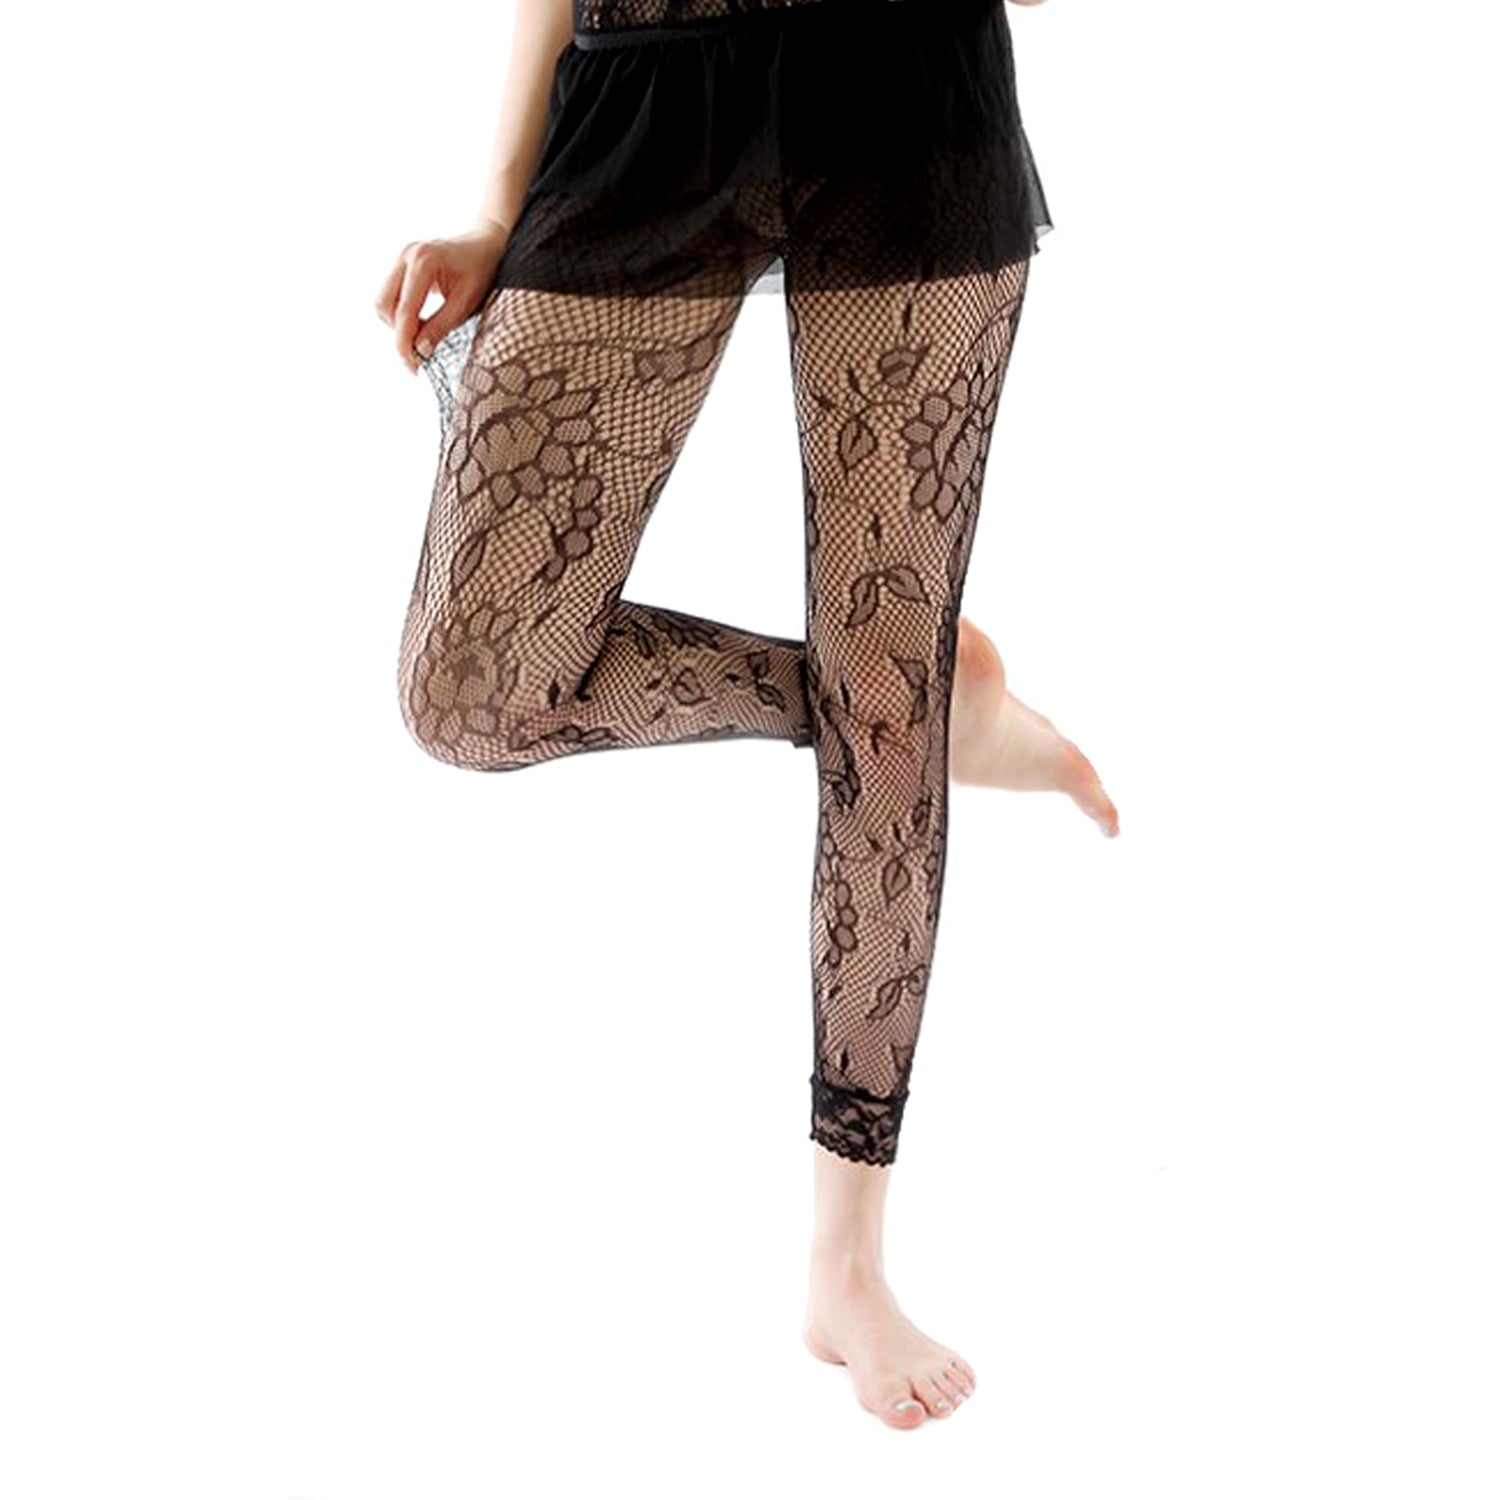 Simply Joshimo Floral Patterned Black Footless Fishnet Tights